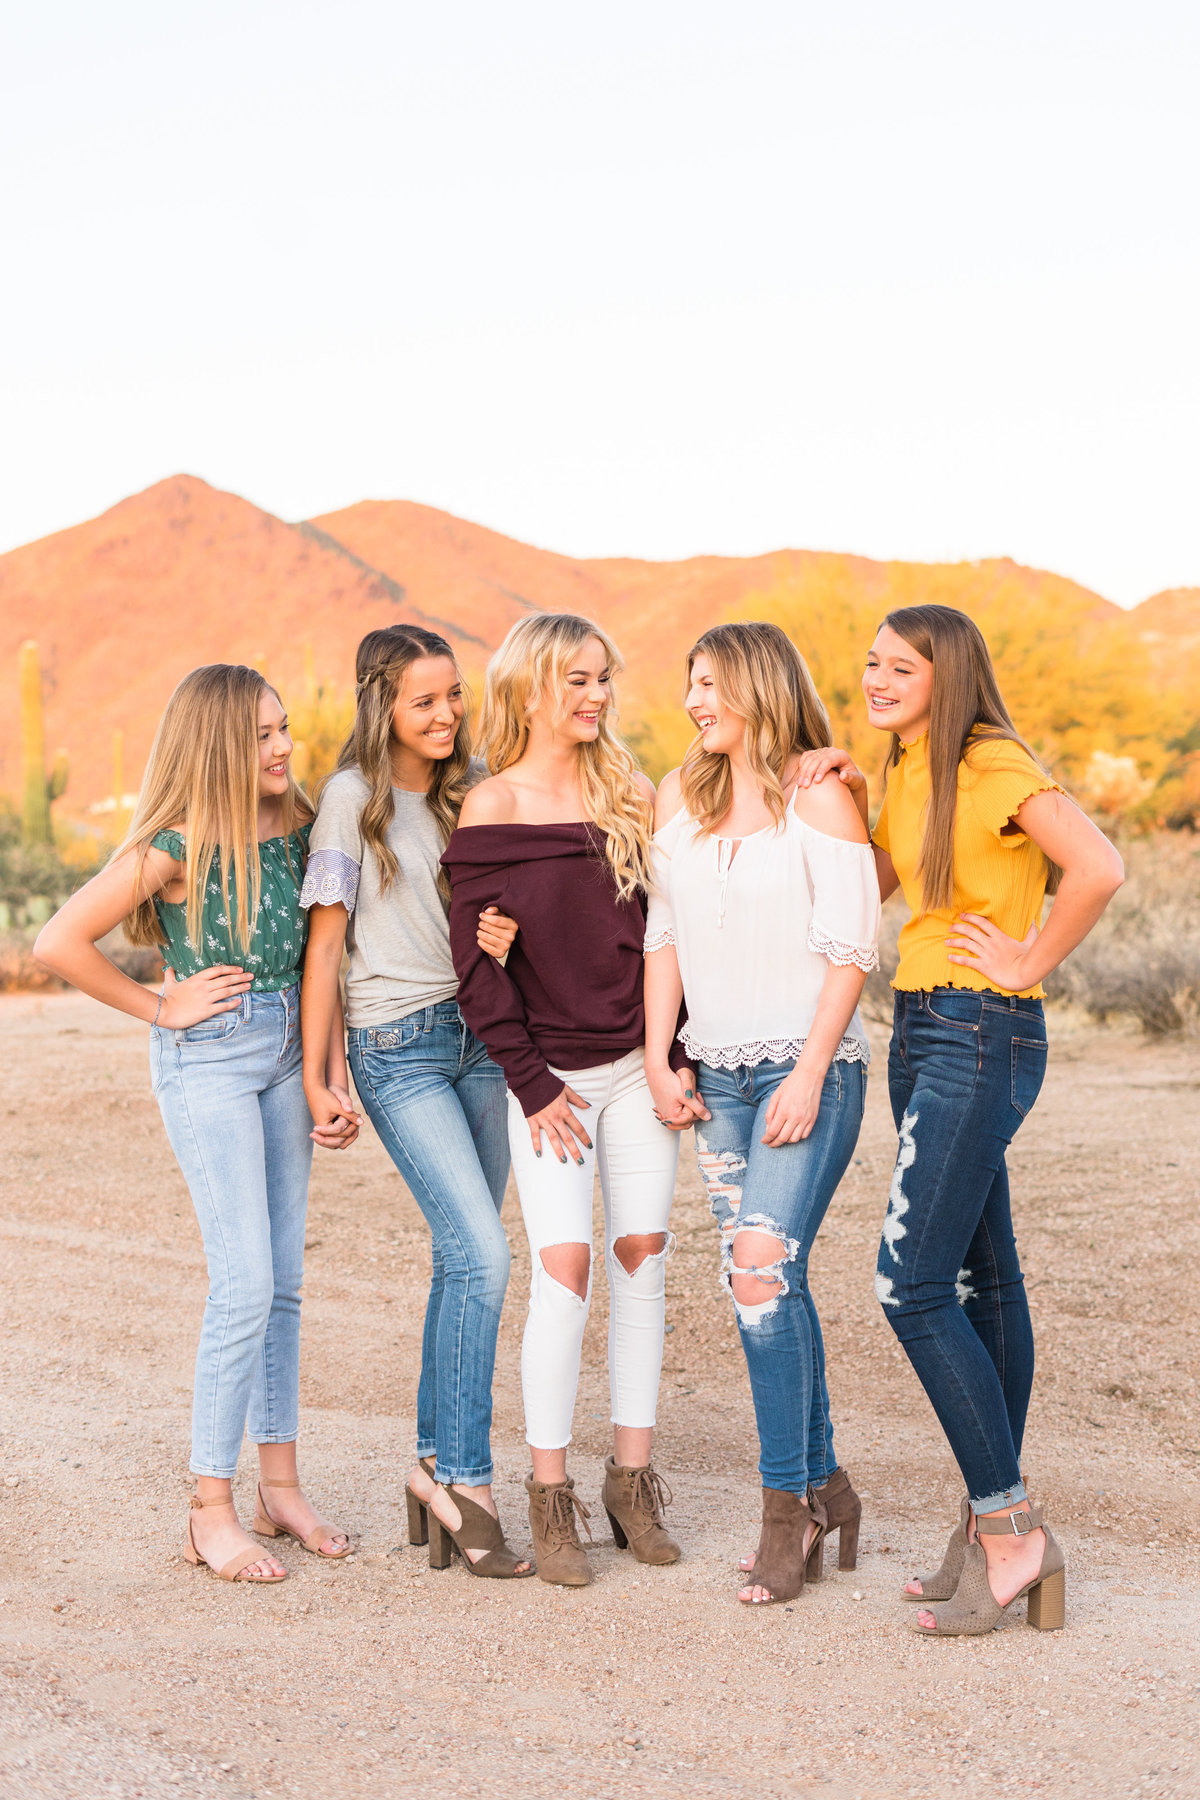 Five girls holding hands and laughing in desert